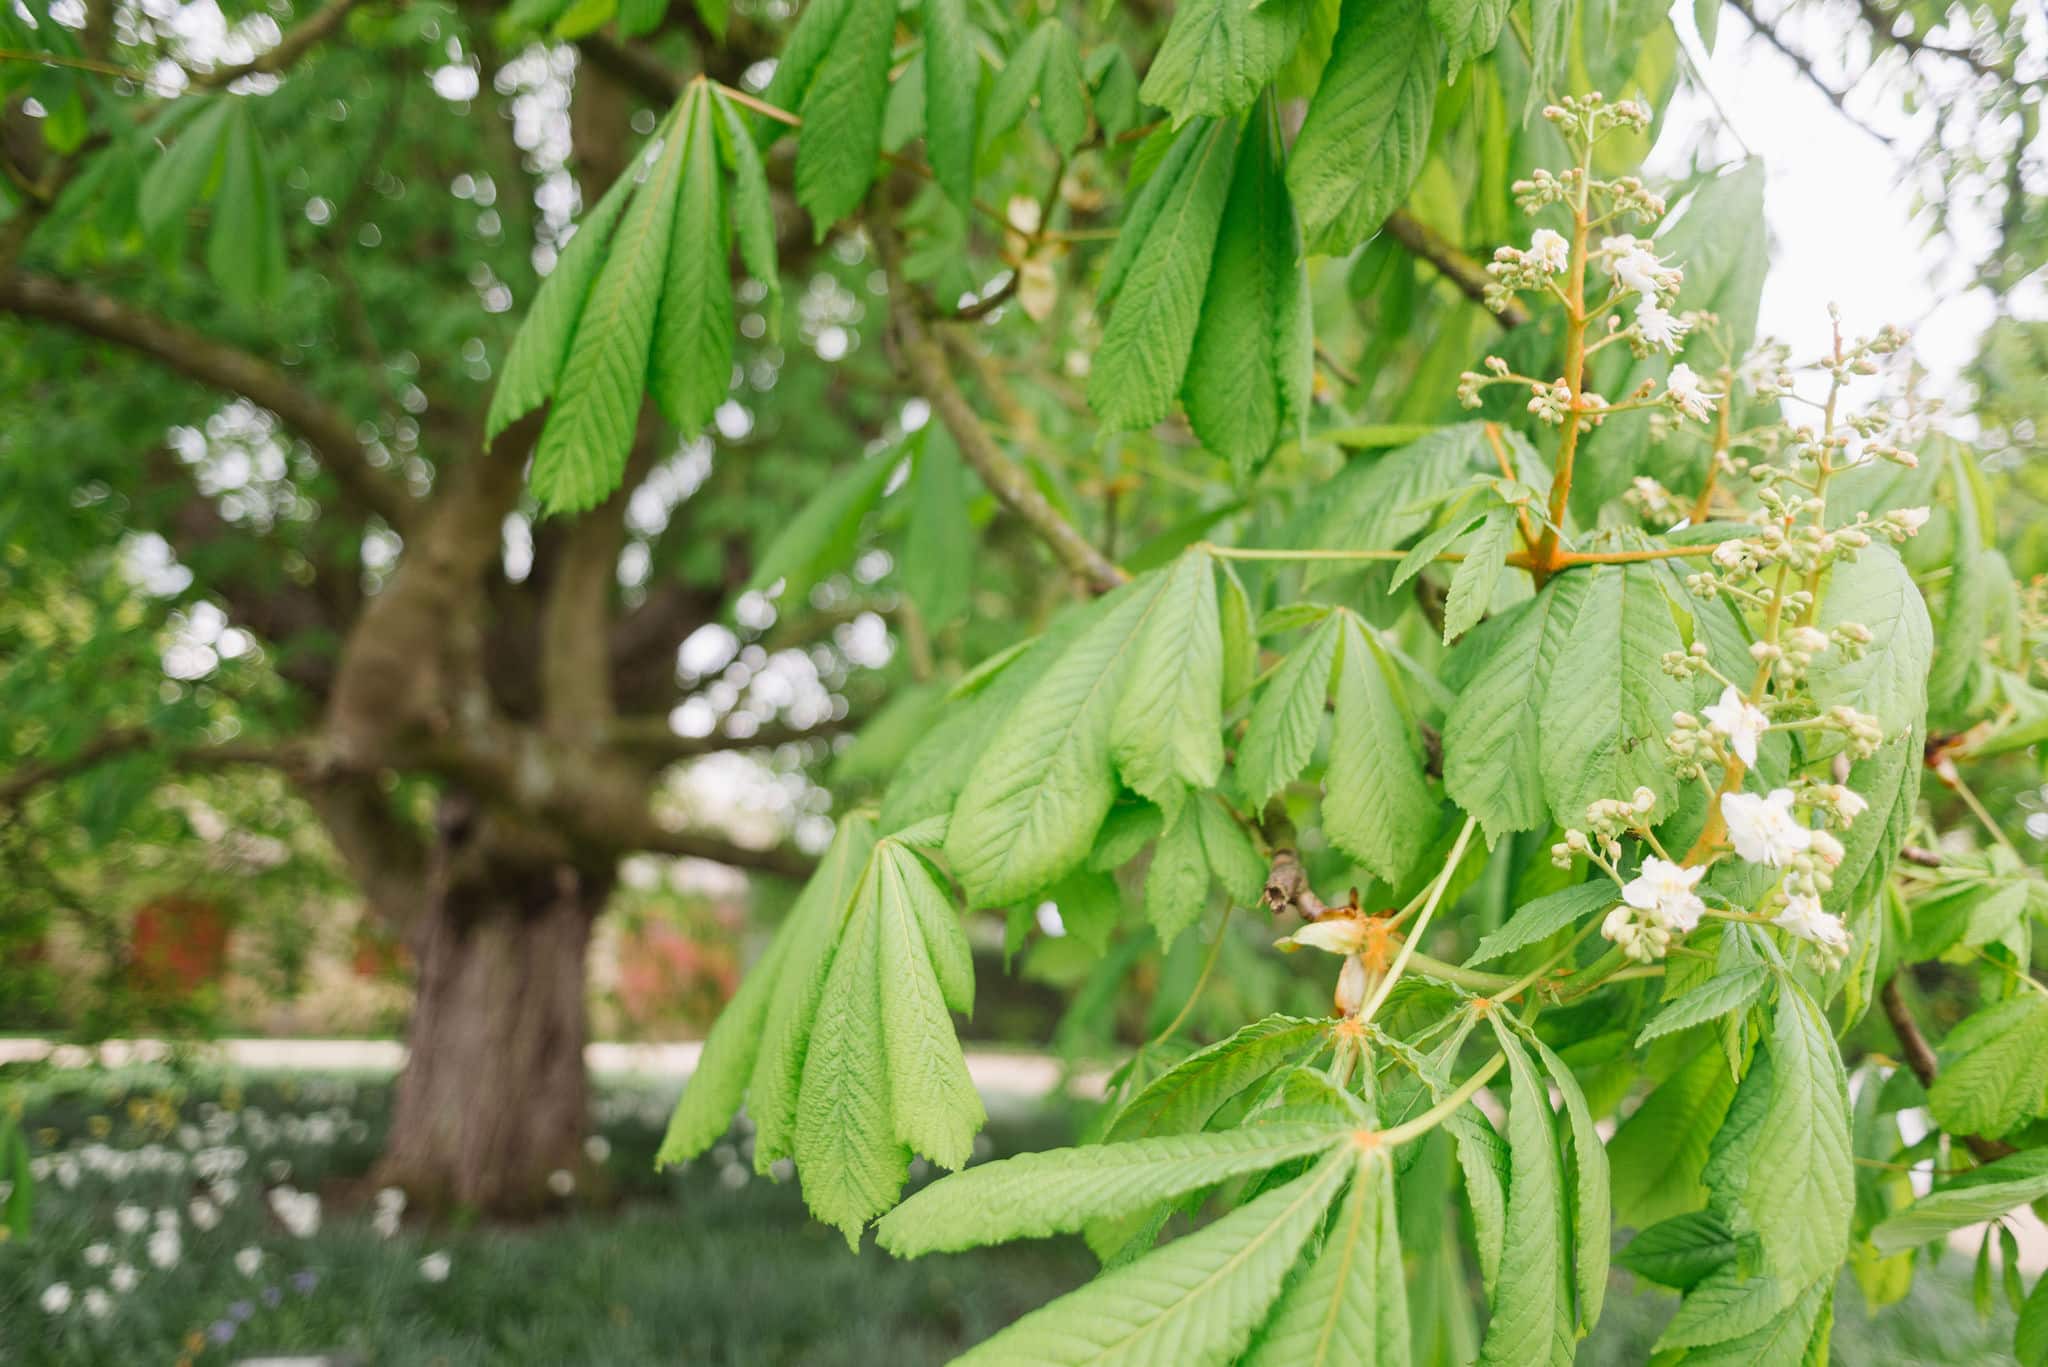 Horse Chestnut Tree in Bloom at South Farm